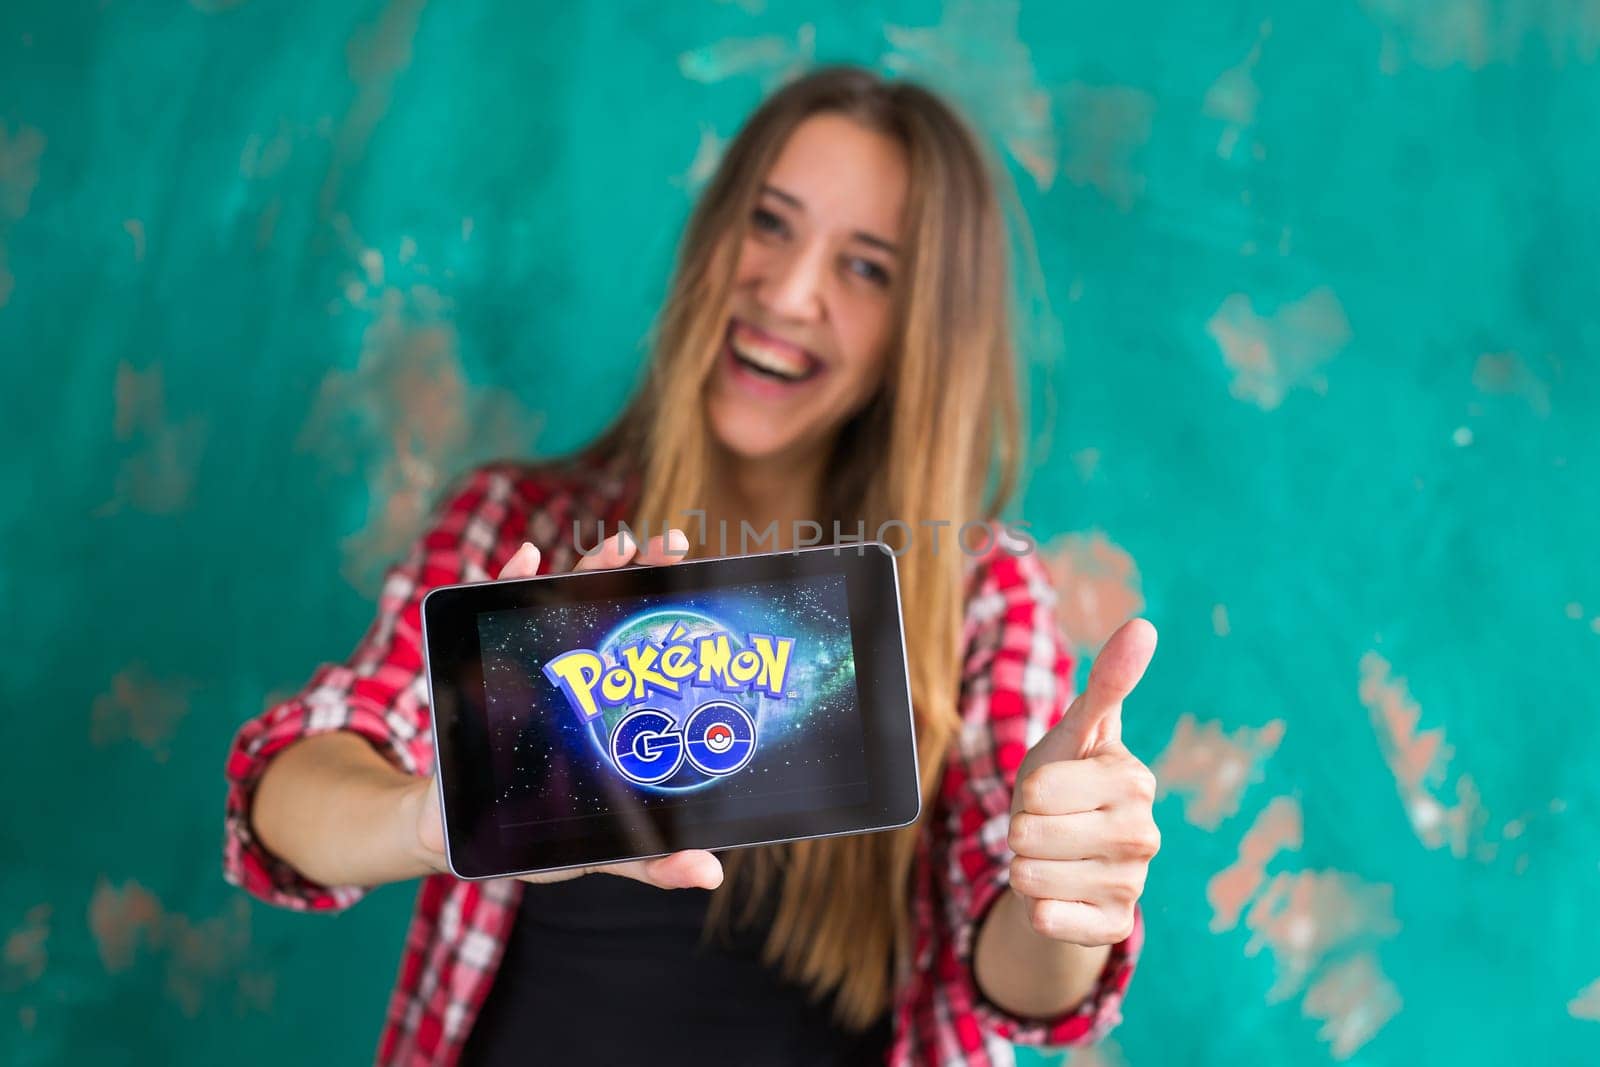 Ufa, Russia. - July 29: Woman show the tablet with Pokemon Go logo by Satura86